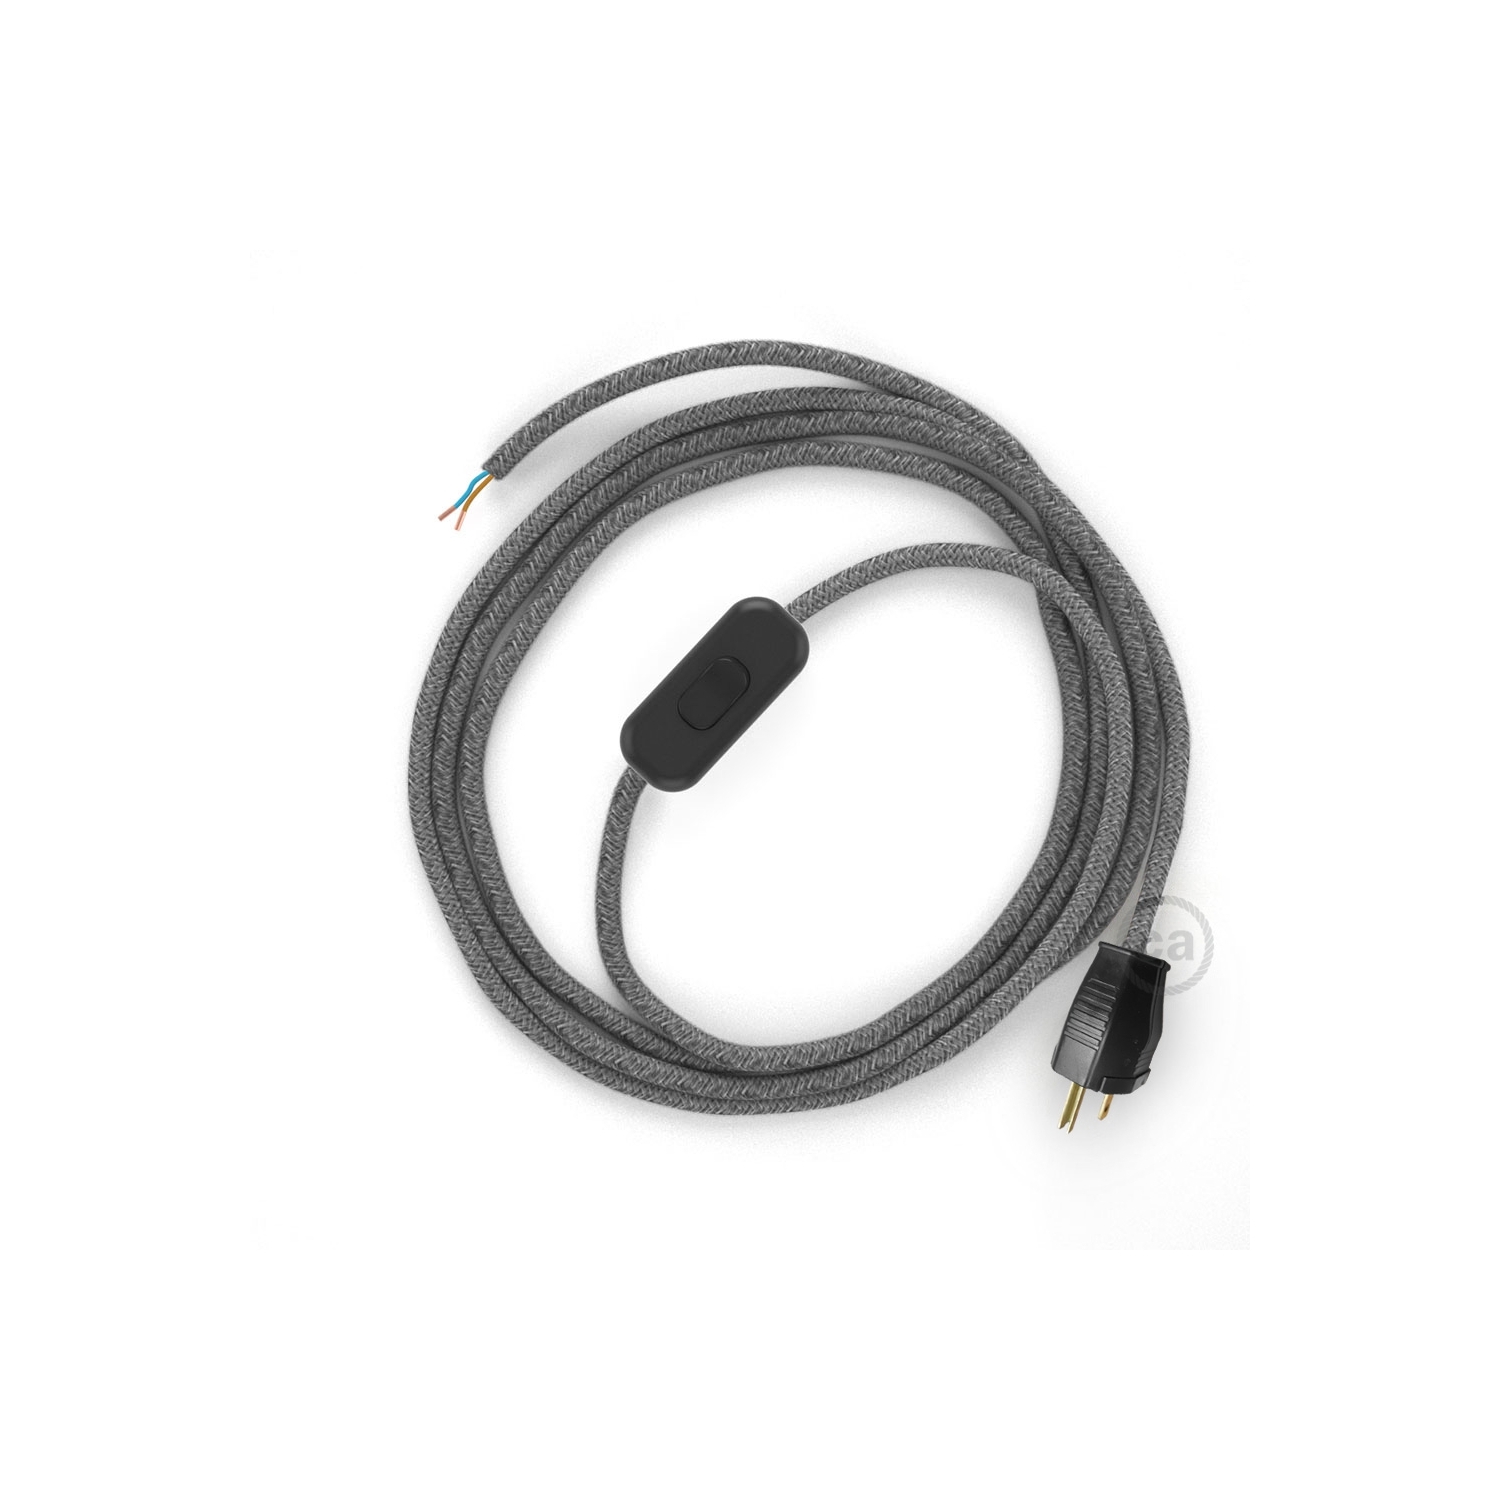 Power Cord with in-line switch, RN02 Gray Linen - Choose color of switch/plug